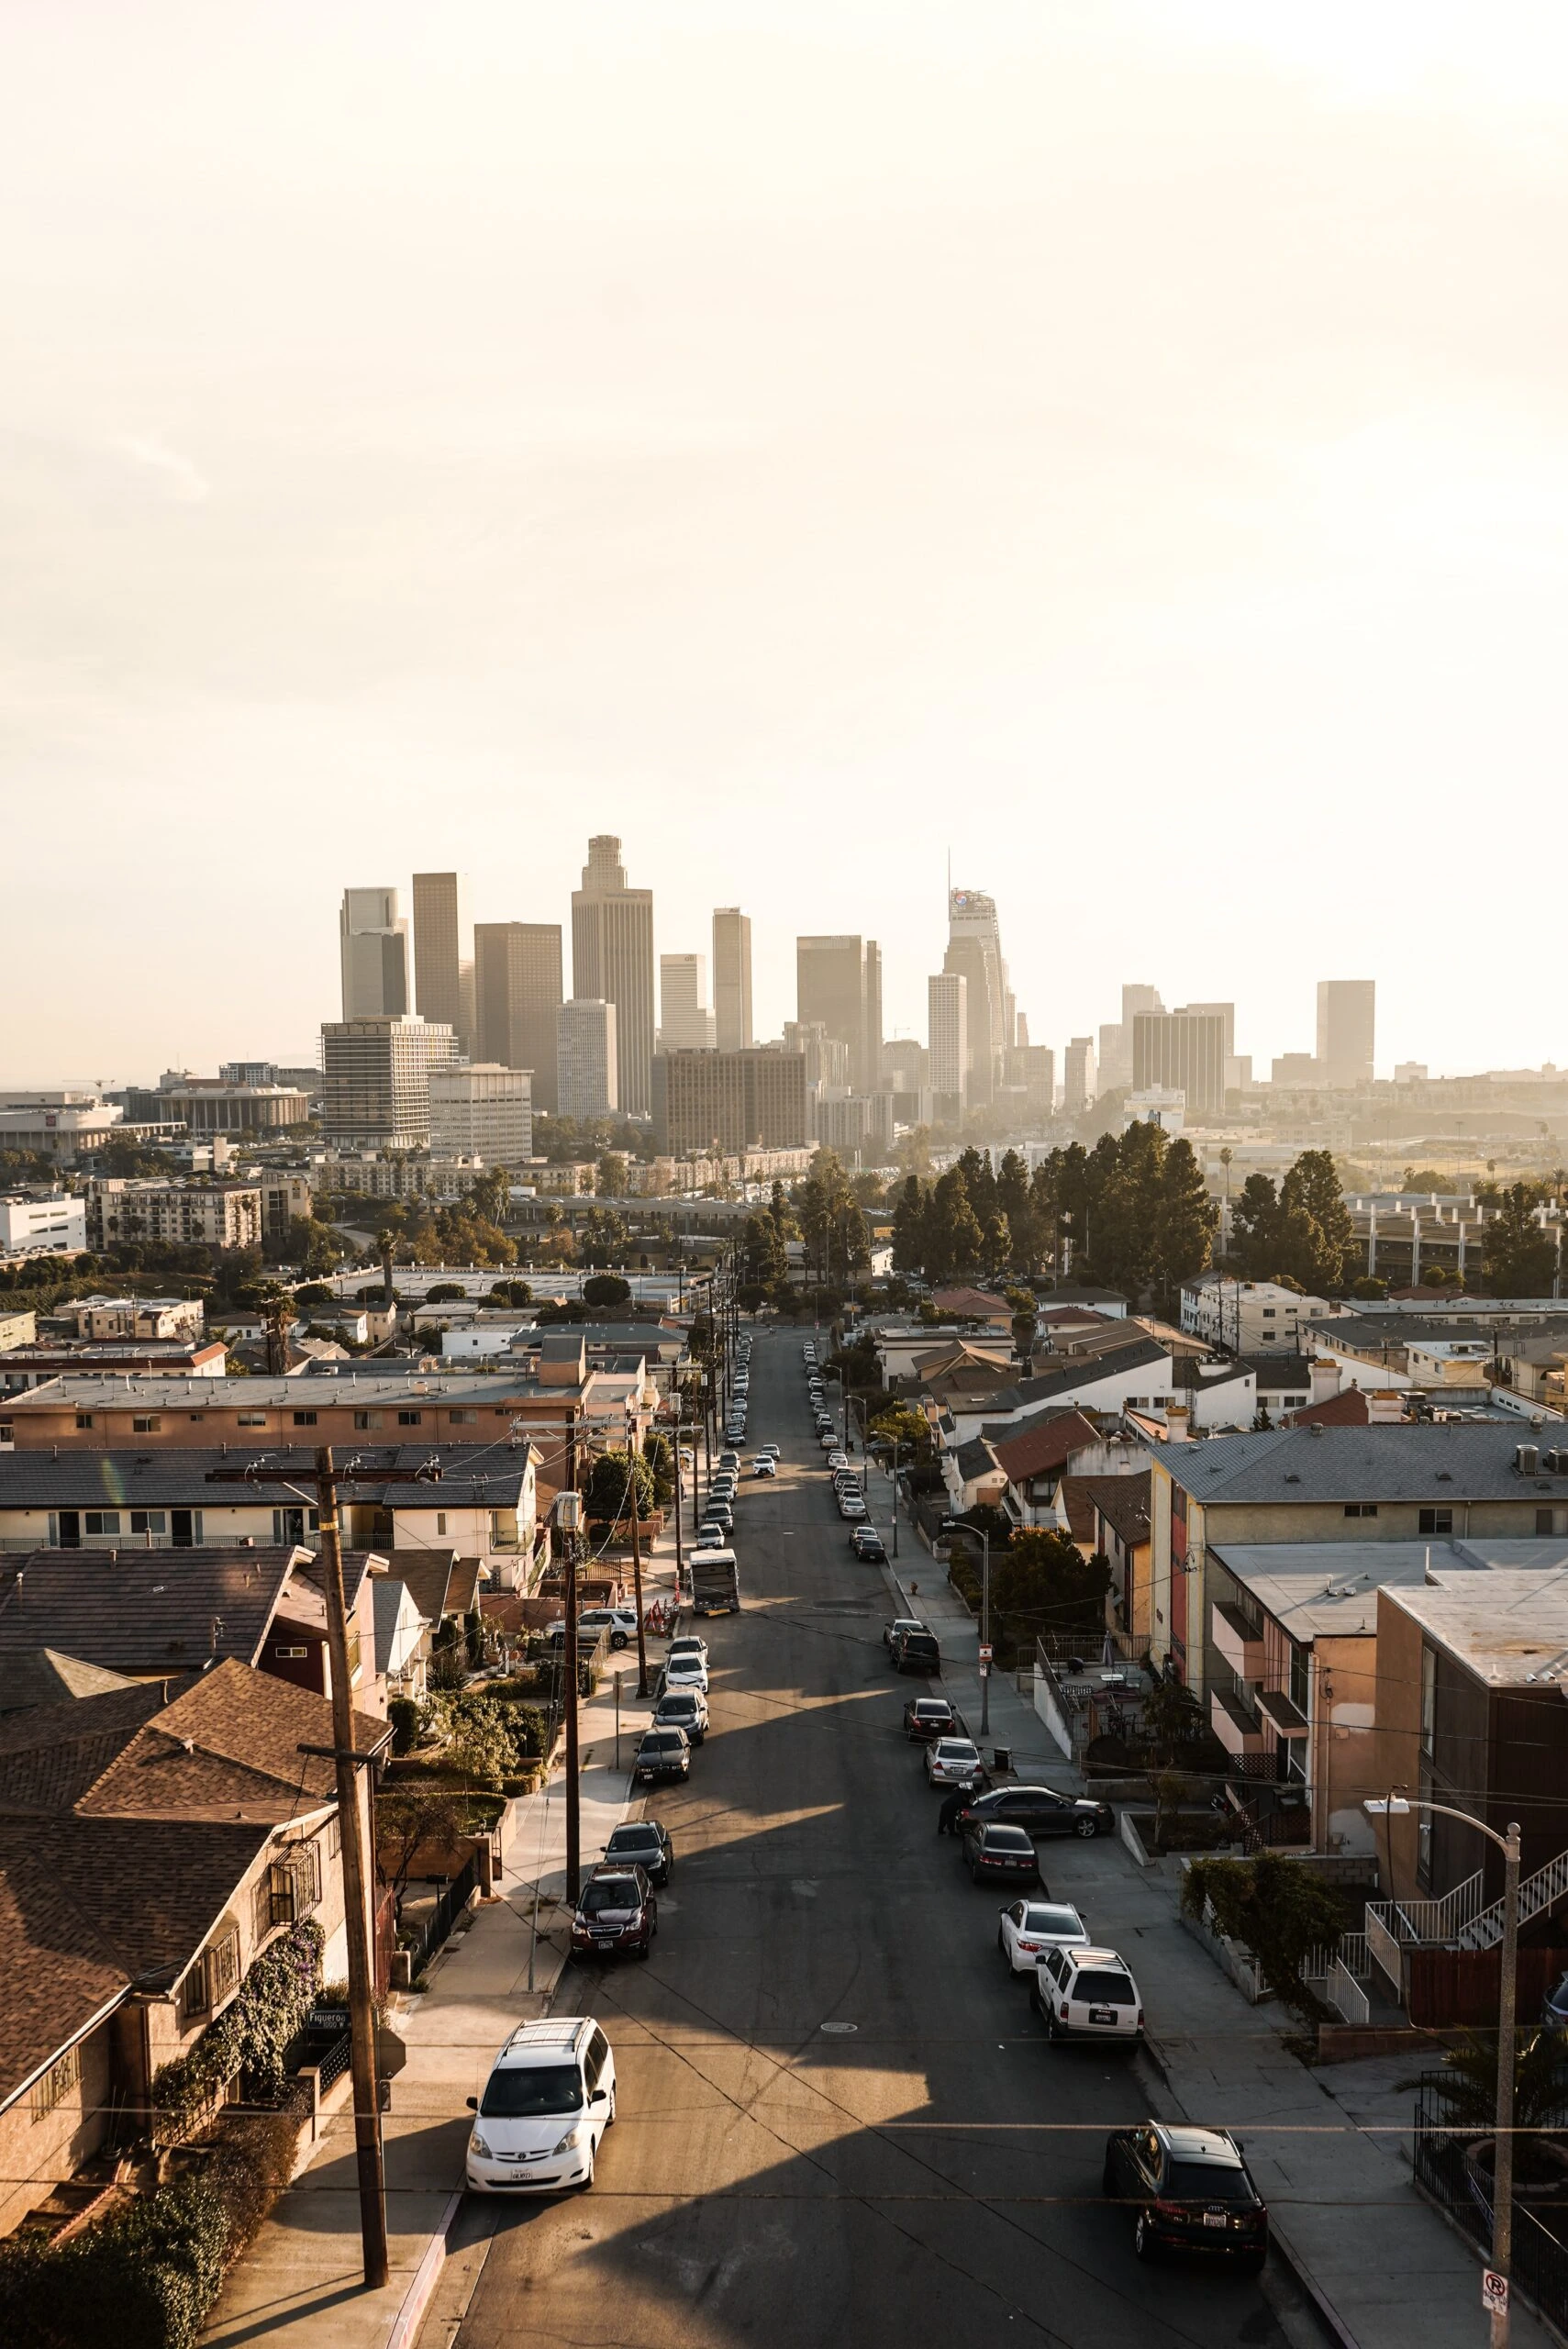 Los Angeles, Los angeles, États-Unis Published on November 20, 2018 ILCE-7M3 Free to use under the Unsplash License Lost in Los Angeles